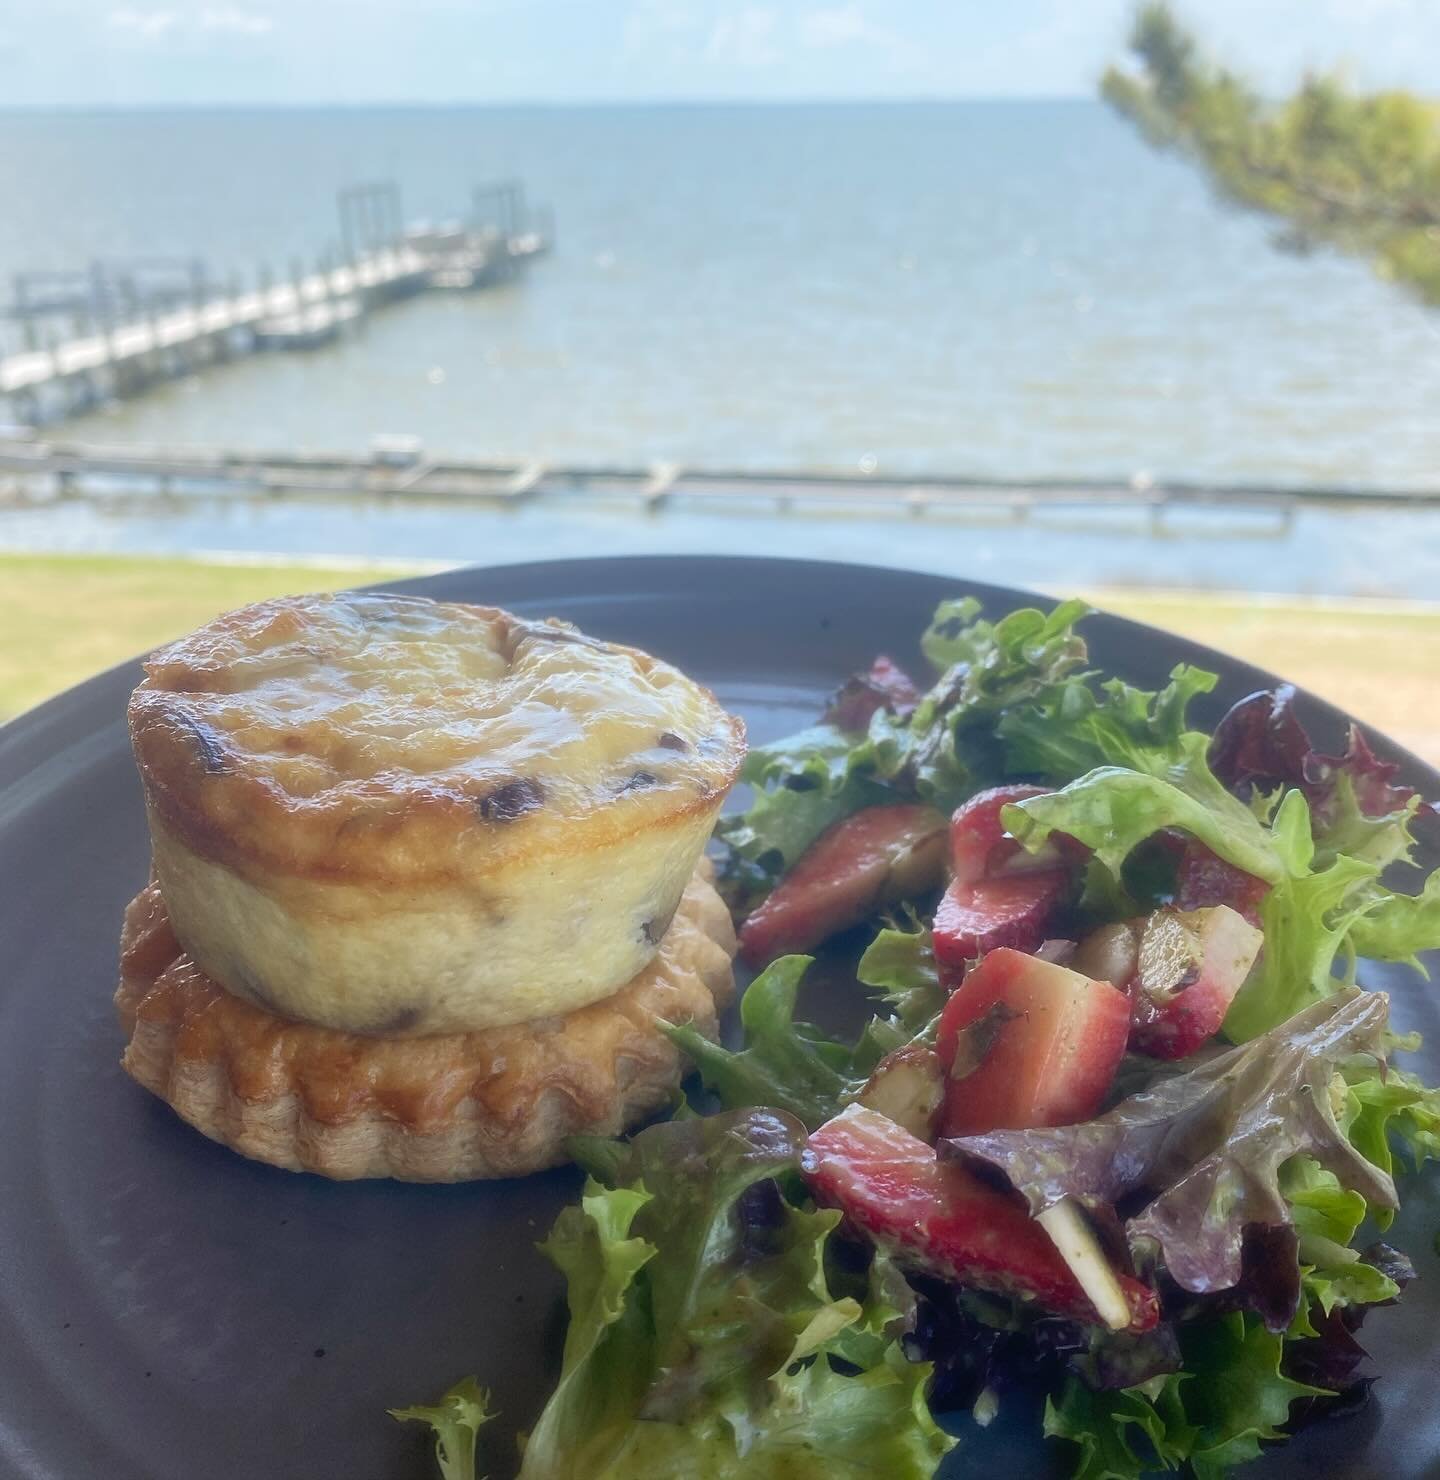 The kitchen has some lovely specials planned for Mother&rsquo;s Day including this robiola cheese, asparagus, and cremini quiche with puff pastry crust and a strawberry salad. We&rsquo;re open for both brunch and dinner on Mother&rsquo;s Day and ever